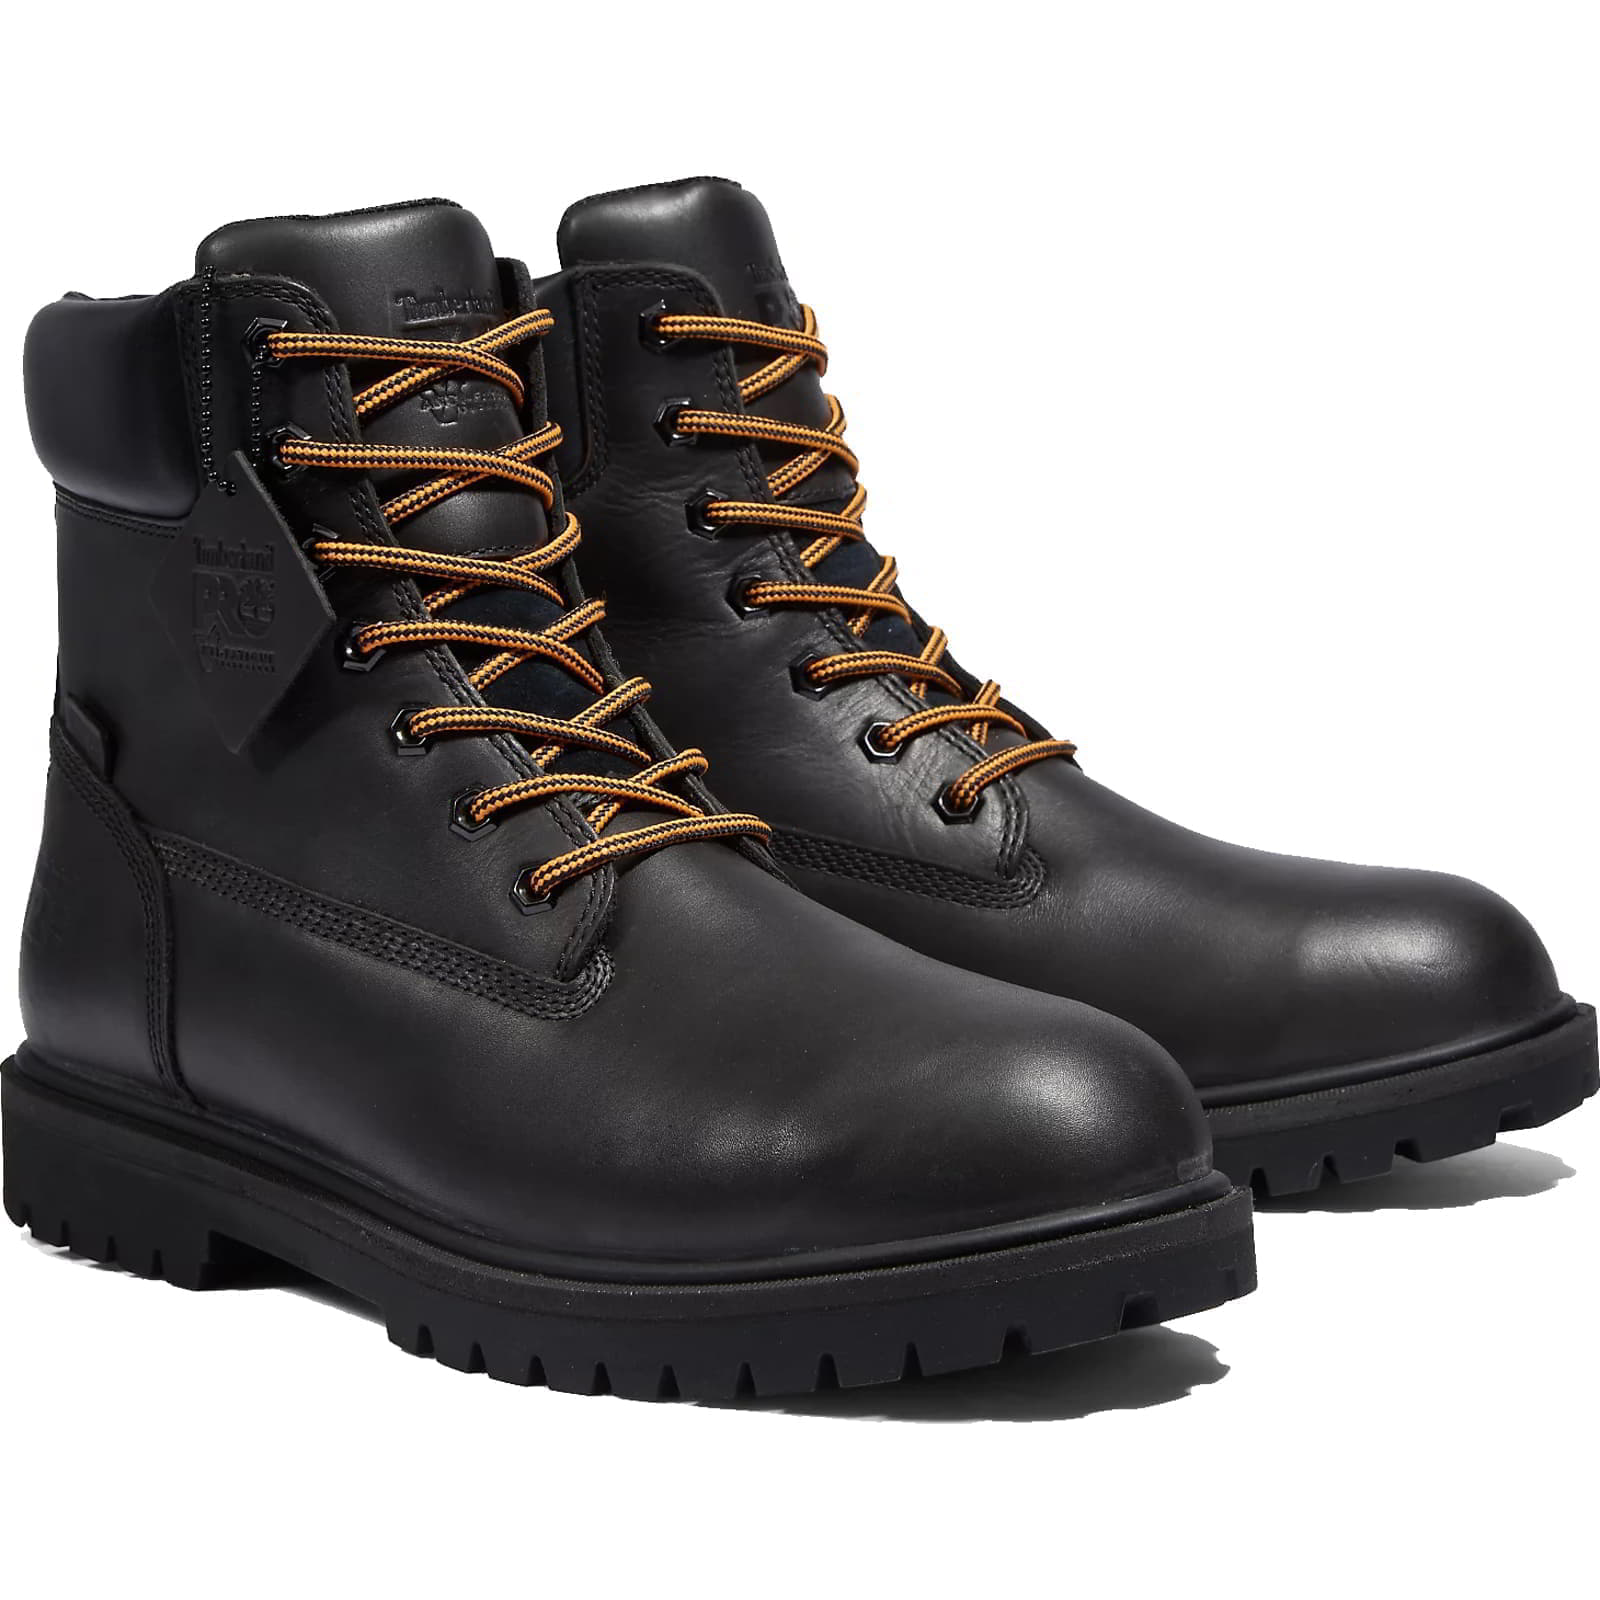 Timberland Pro Mens Iconic Waterproof Safety Toe Cap Work Ankle Boots - UK 8